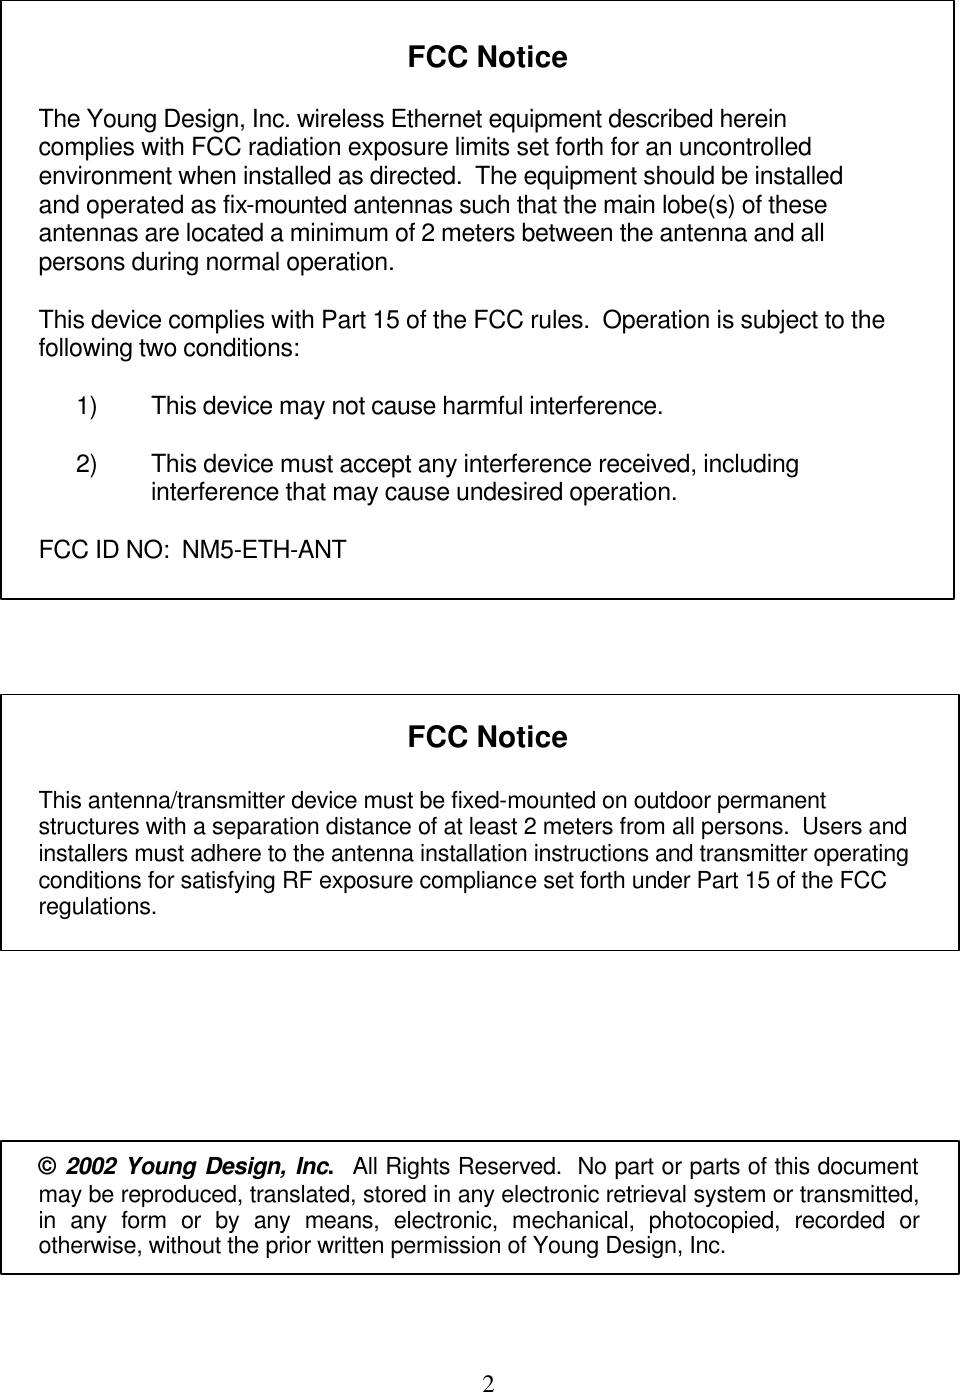  2     FCC Notice  The Young Design, Inc. wireless Ethernet equipment described herein complies with FCC radiation exposure limits set forth for an uncontrolled environment when installed as directed.  The equipment should be installed and operated as fix-mounted antennas such that the main lobe(s) of these antennas are located a minimum of 2 meters between the antenna and all persons during normal operation.    This device complies with Part 15 of the FCC rules.  Operation is subject to the following two conditions:    1) This device may not cause harmful interference.  2) This device must accept any interference received, including interference that may cause undesired operation.  FCC ID NO:  NM5-ETH-ANT      FCC Notice  This antenna/transmitter device must be fixed-mounted on outdoor permanent structures with a separation distance of at least 2 meters from all persons.  Users and installers must adhere to the antenna installation instructions and transmitter operating conditions for satisfying RF exposure compliance set forth under Part 15 of the FCC regulations.        © 2002 Young Design, Inc.  All Rights Reserved.  No part or parts of this document may be reproduced, translated, stored in any electronic retrieval system or transmitted, in any form or by any means, electronic, mechanical, photocopied, recorded or otherwise, without the prior written permission of Young Design, Inc.  